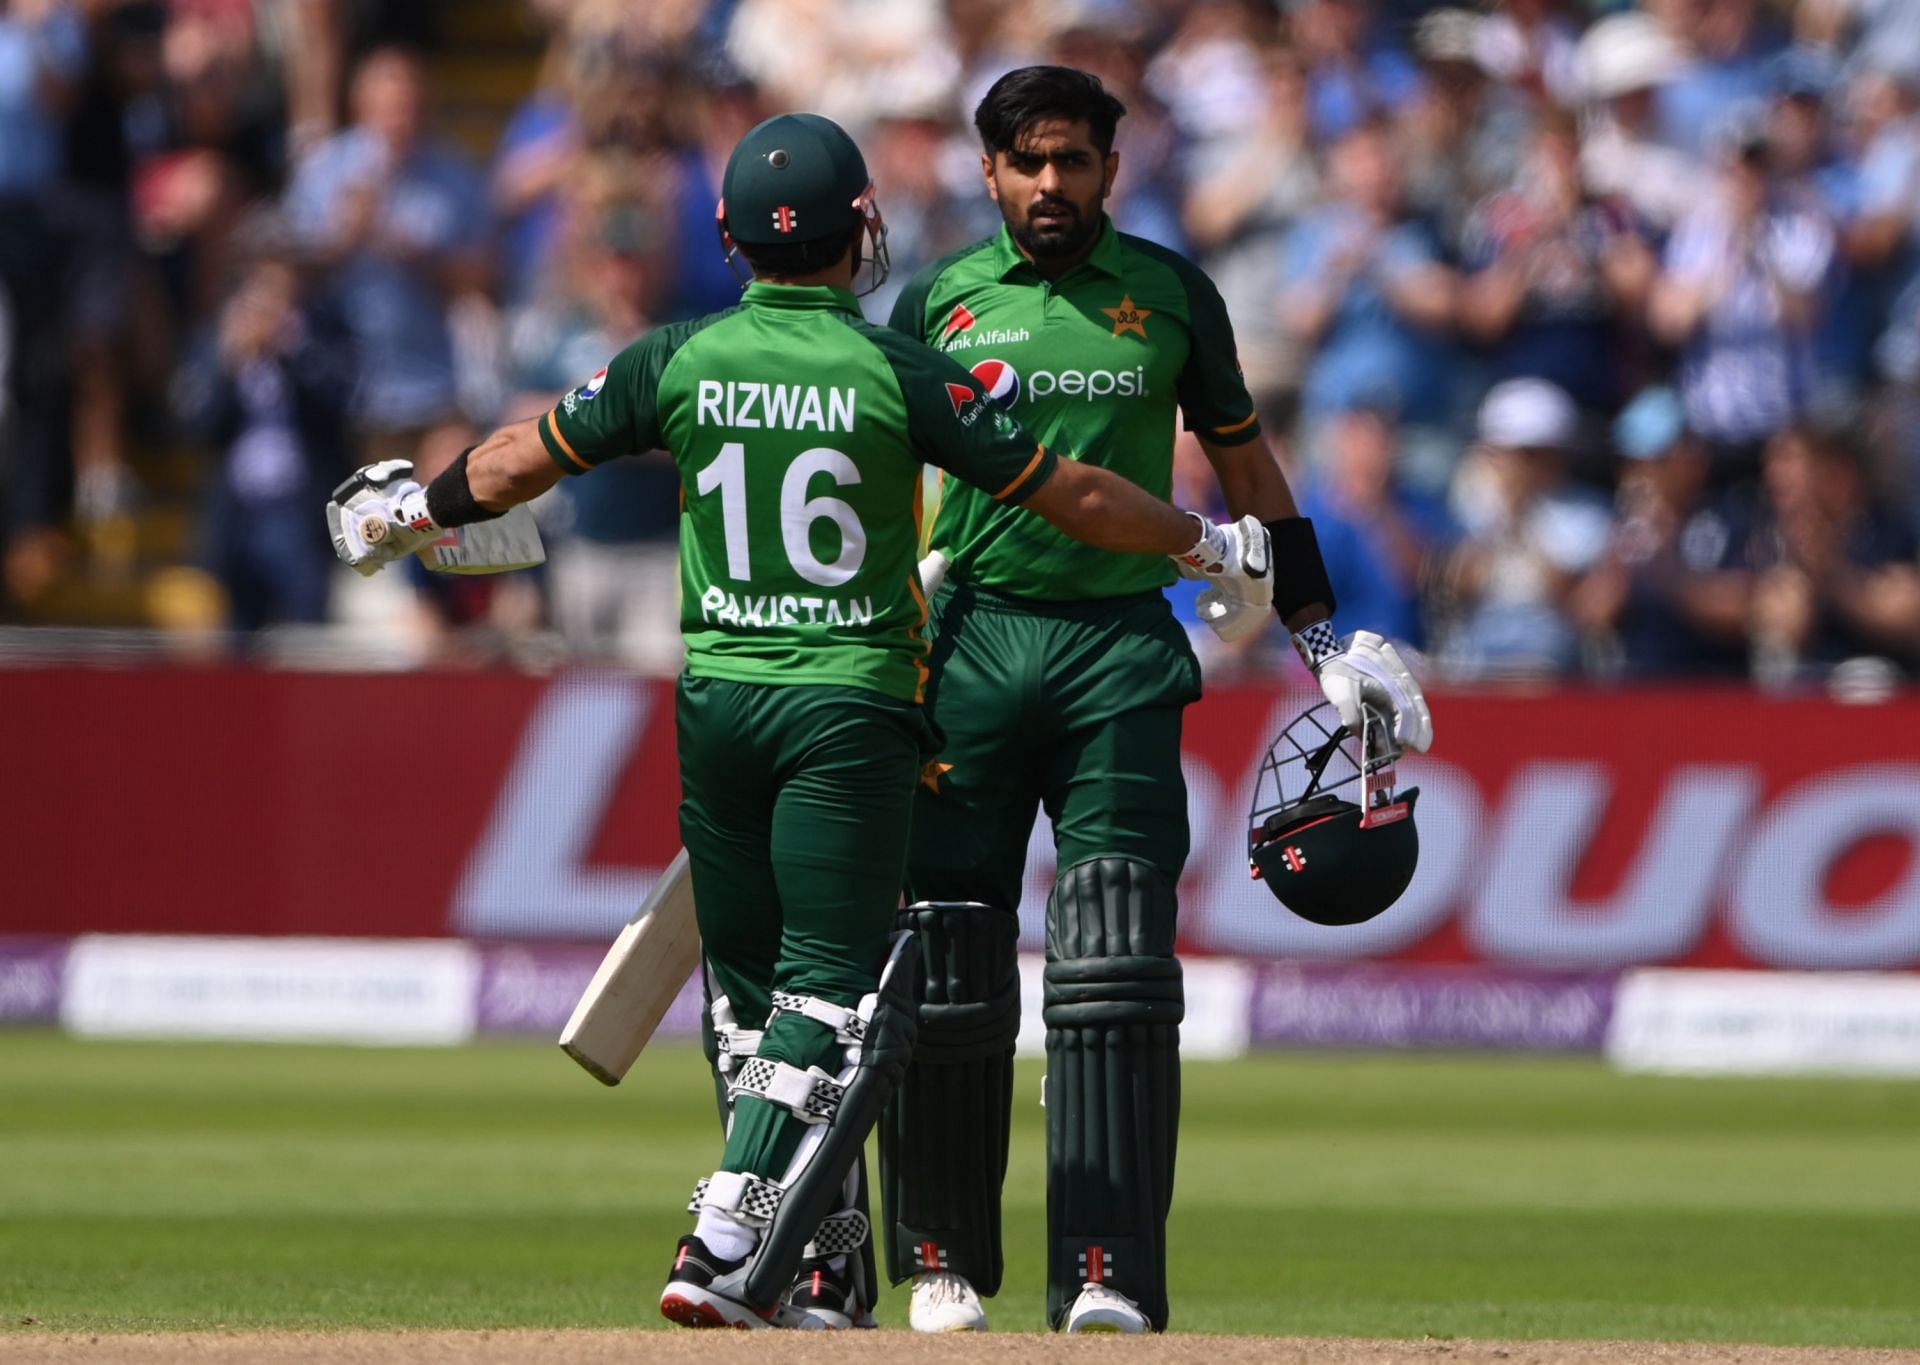 Mohammad Rizwan and Babar Azam. Pic: Getty Images